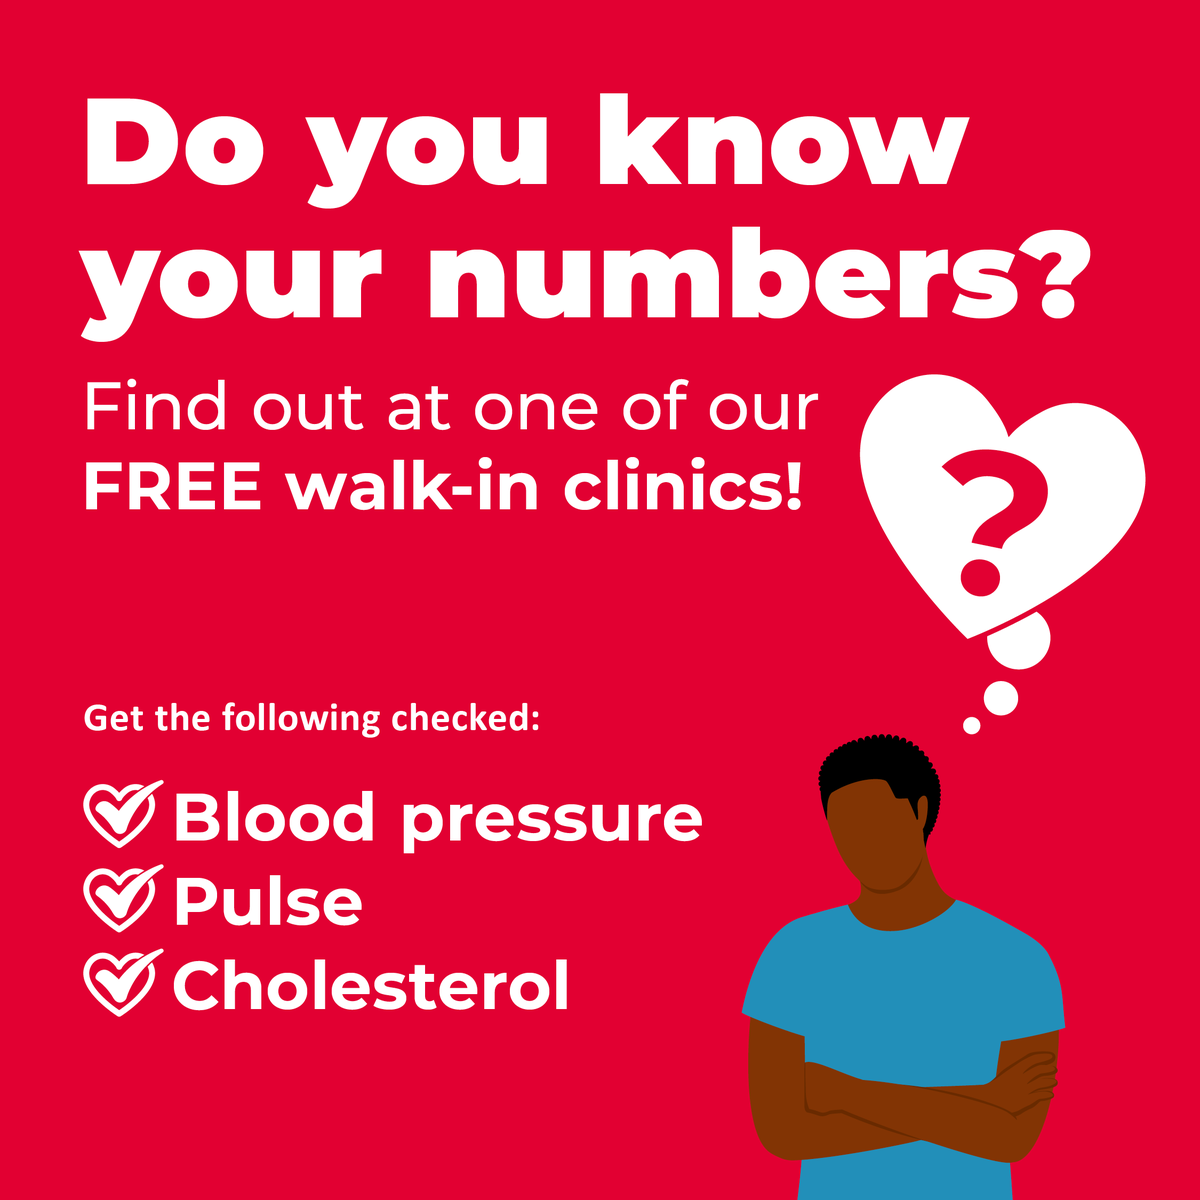 ❤ Do you know your numbers? Get your blood pressure, pulse and cholesterol checked today (Sat 4 May) at Bickerstaffe Square, outside Sainsburys. Pop along anytime 10am-4pm. It only takes around 10 minutes. No appointment needed! For more info, visit: blackpool.gov.uk/KnowYourNumbers